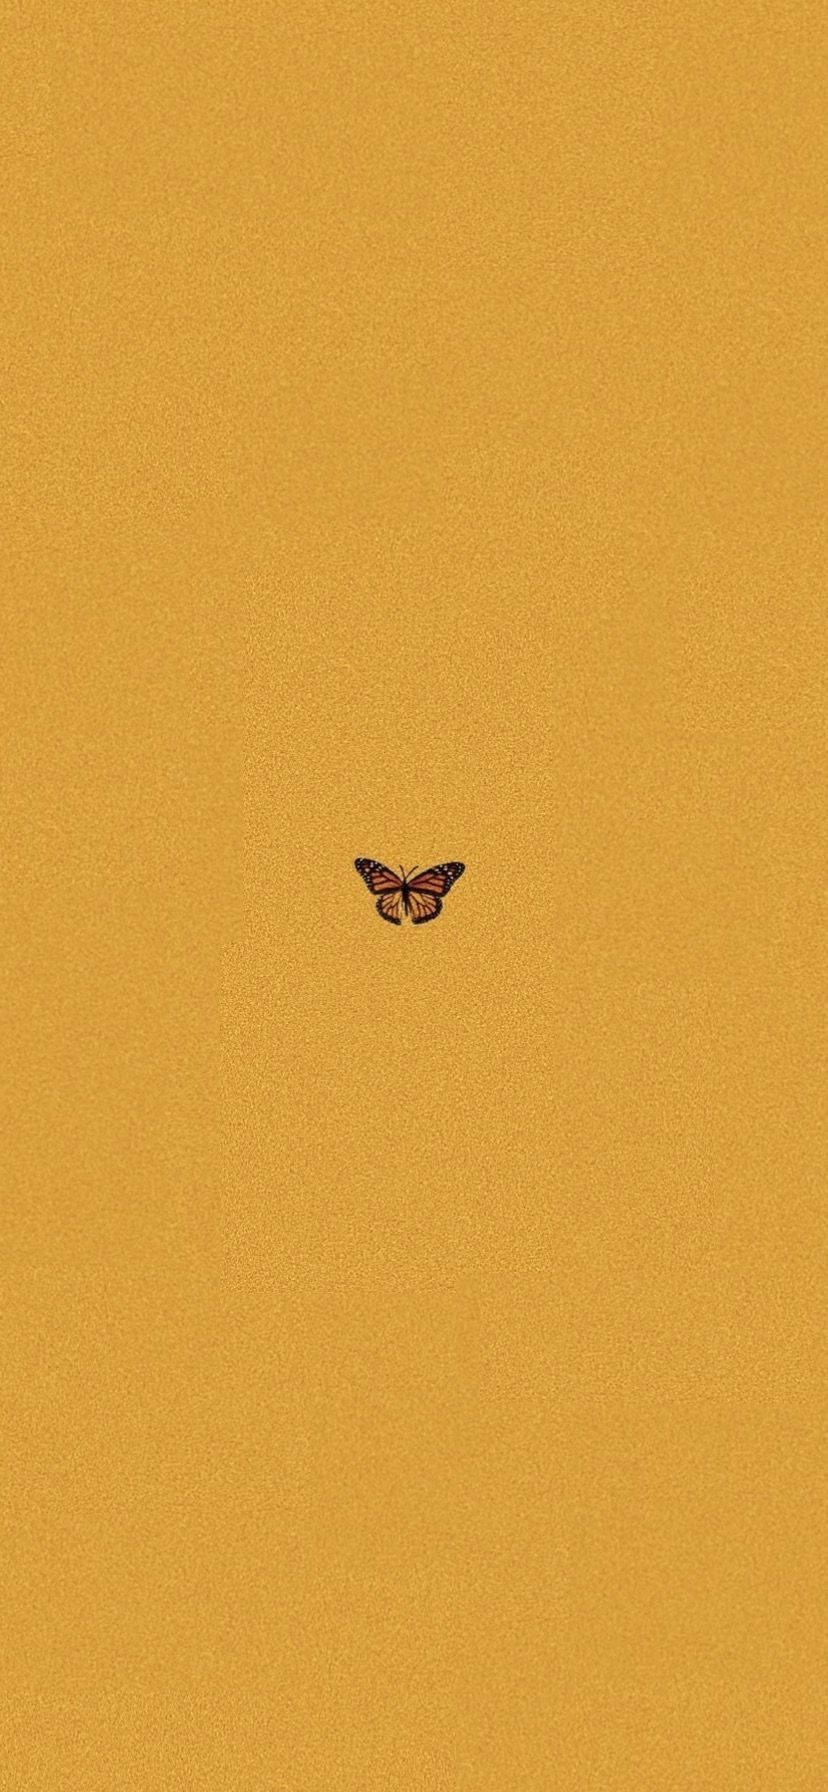 Butterfly Aesthetic Yellow Mustard Background